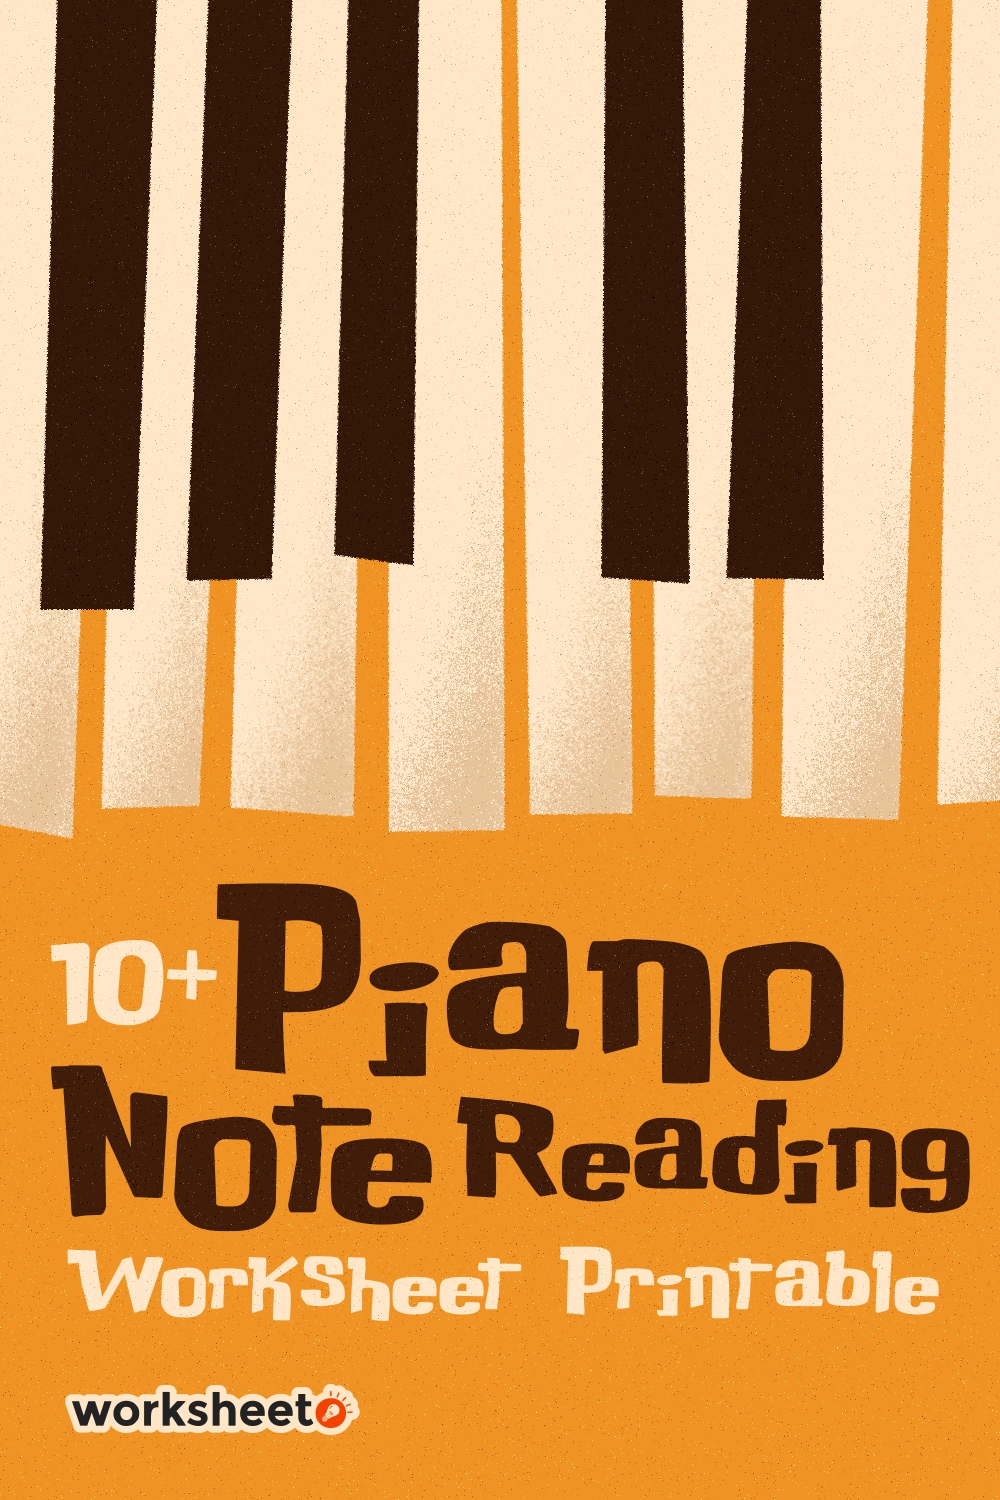 14 Images of Piano Note Reading Worksheets Printable